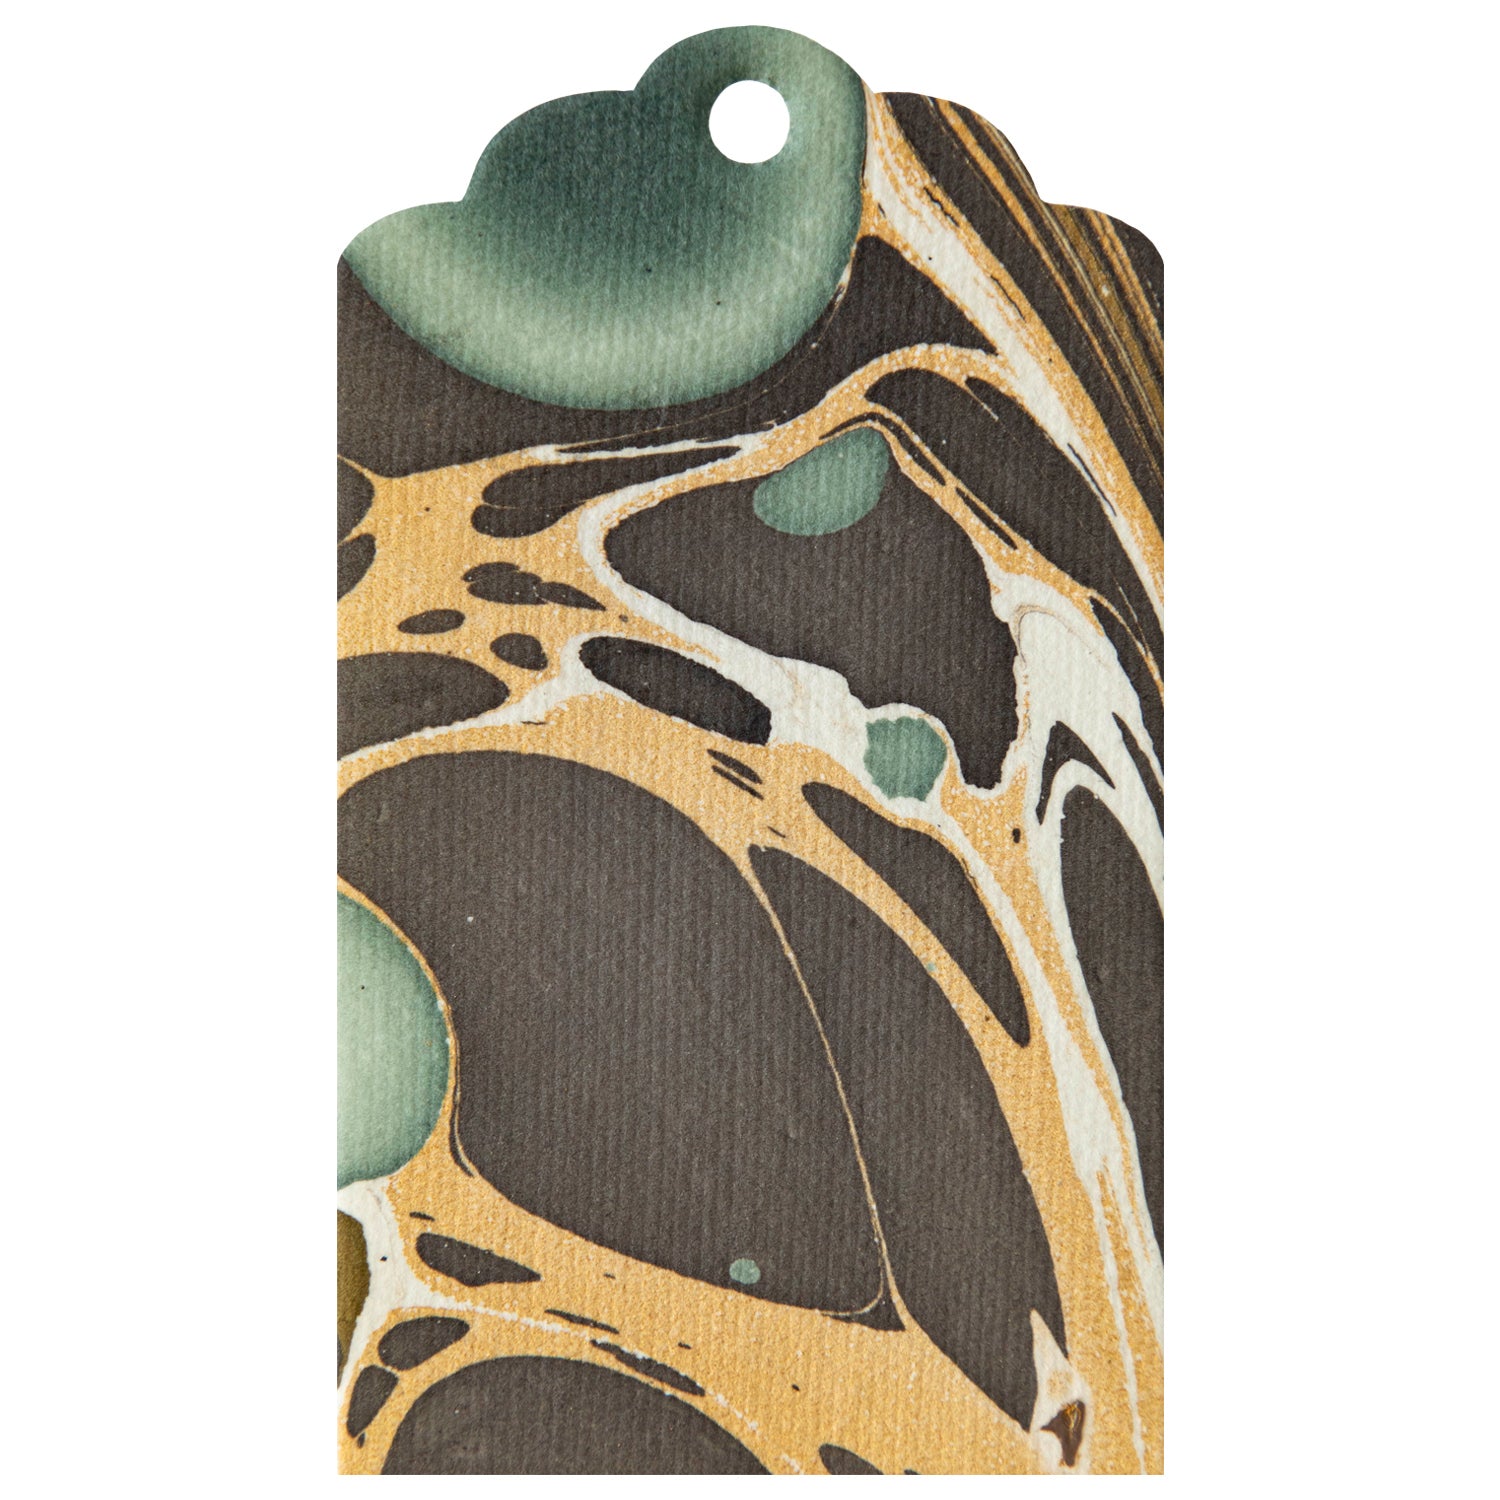 A unique Stone Marbled Gift Tag made from handmade papers by Hester &amp; Cook.